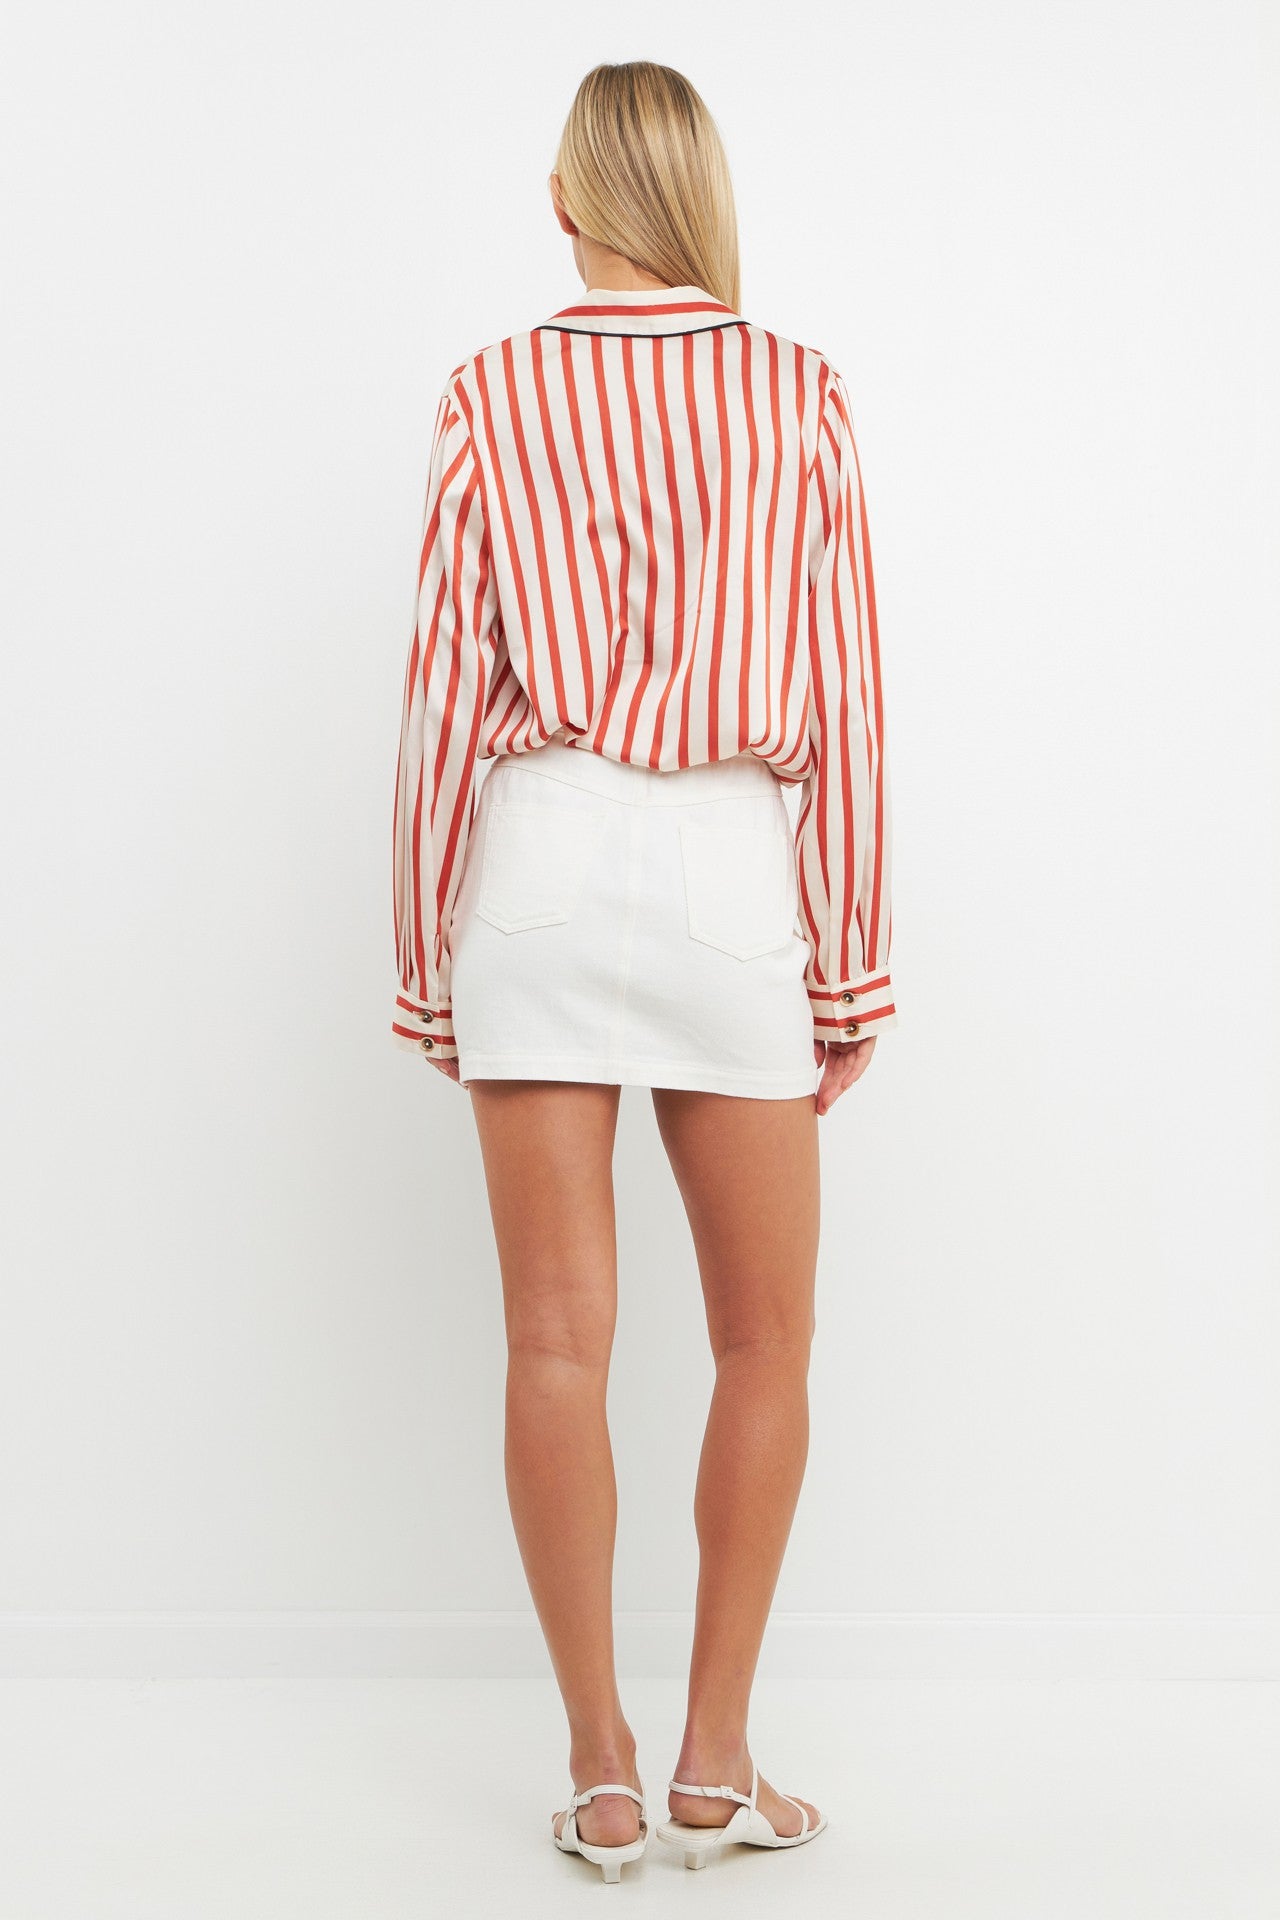 Striped Satin Shirt with Piping